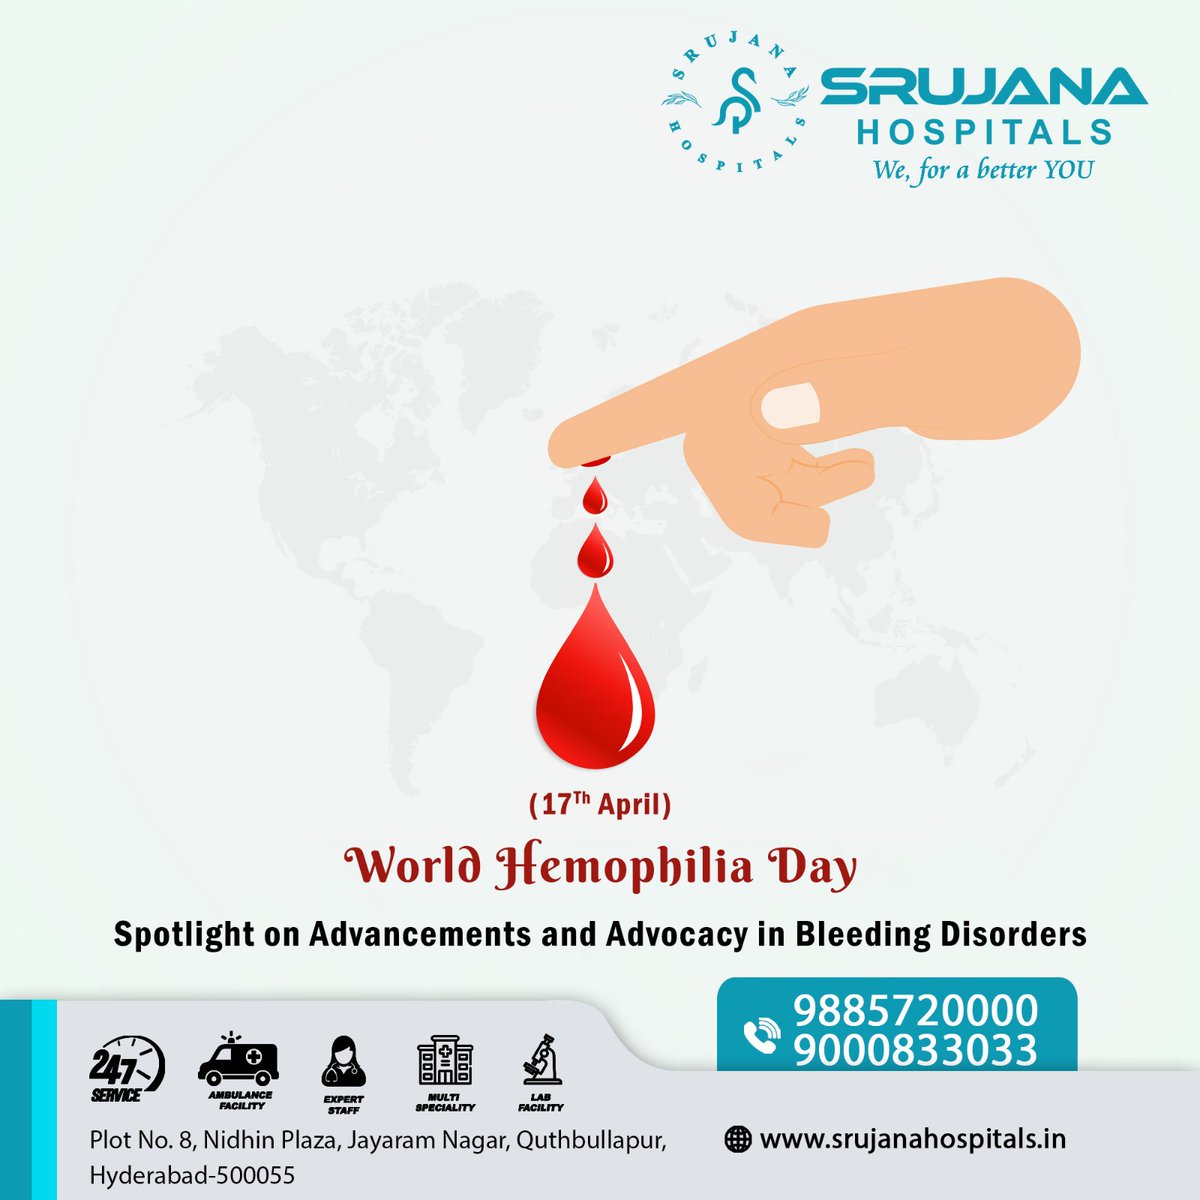 On World Hemophilia Day, let's amplify the voices of those affected and work towards a future of equality and care for all.

#WorldHemophiliaDay #WHD2024 #HemophiliaAwareness #BleedingDisorders #FactorDeficiency #TreatmentForAll #HealthyHemophilia #Srujanahospitals